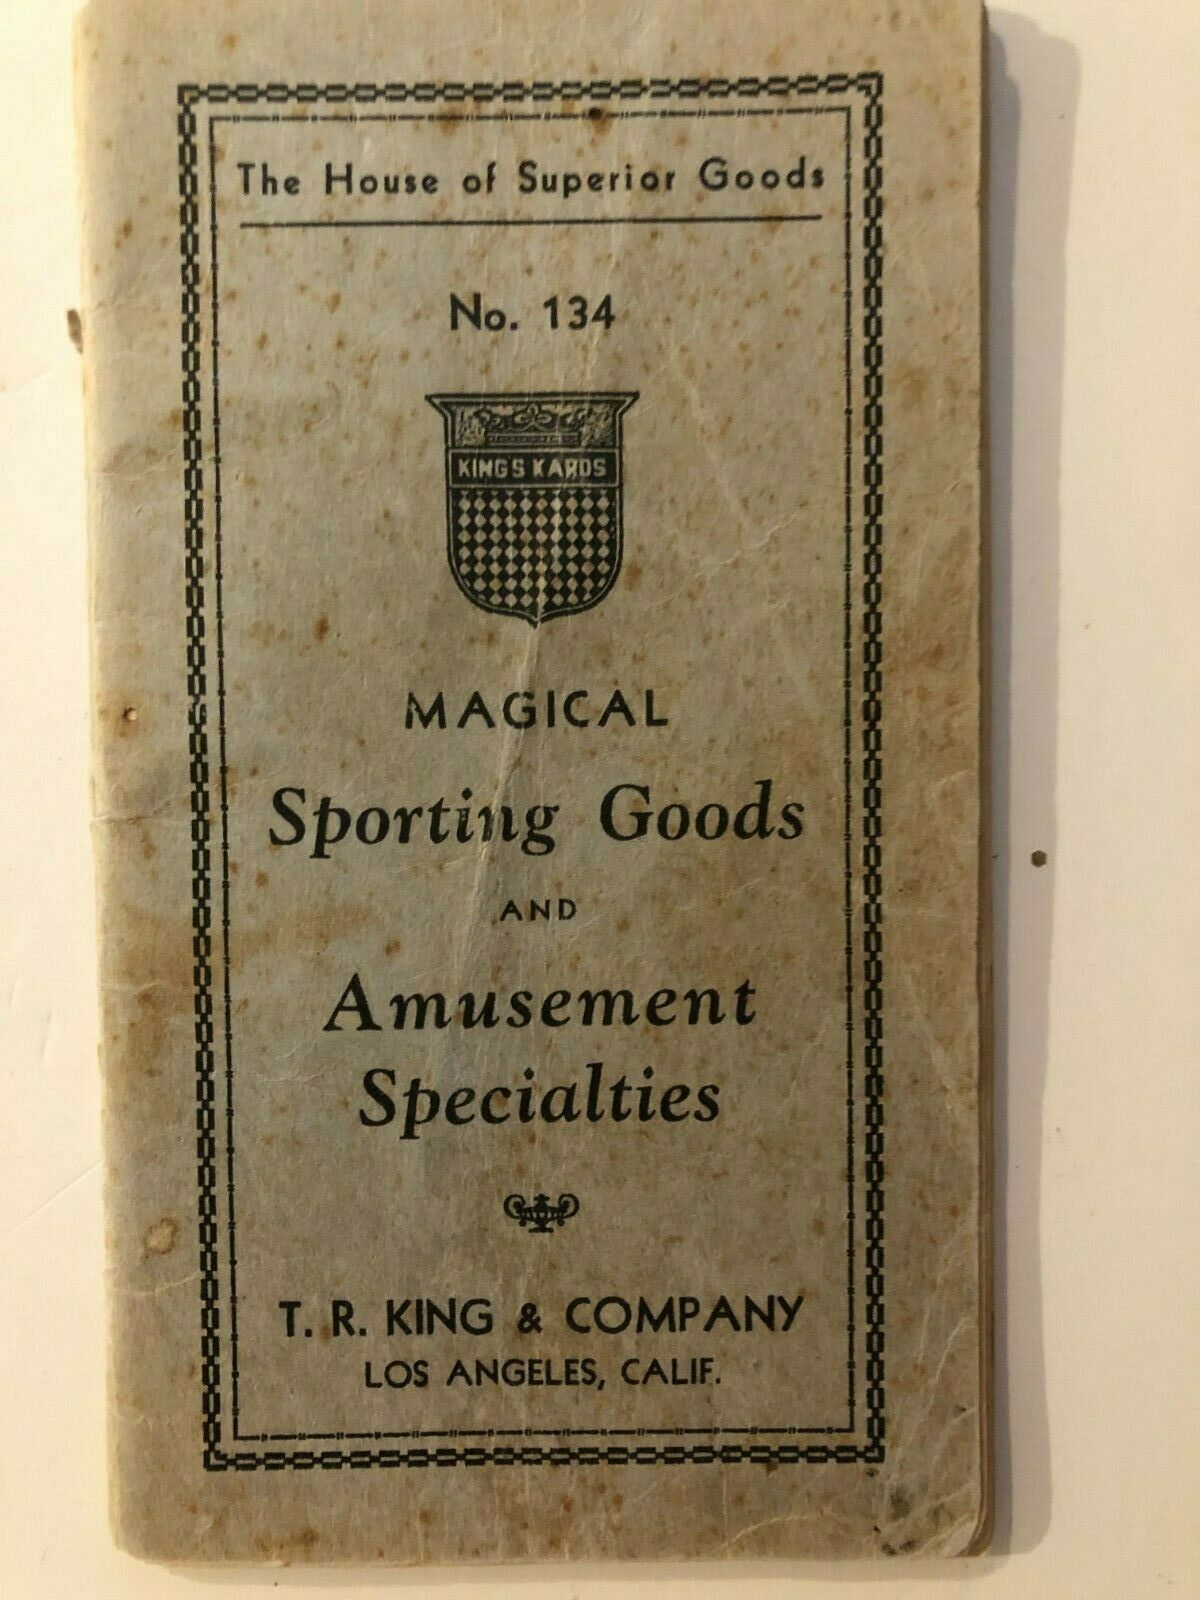 1920's King & Co Catalog Gambling Devices